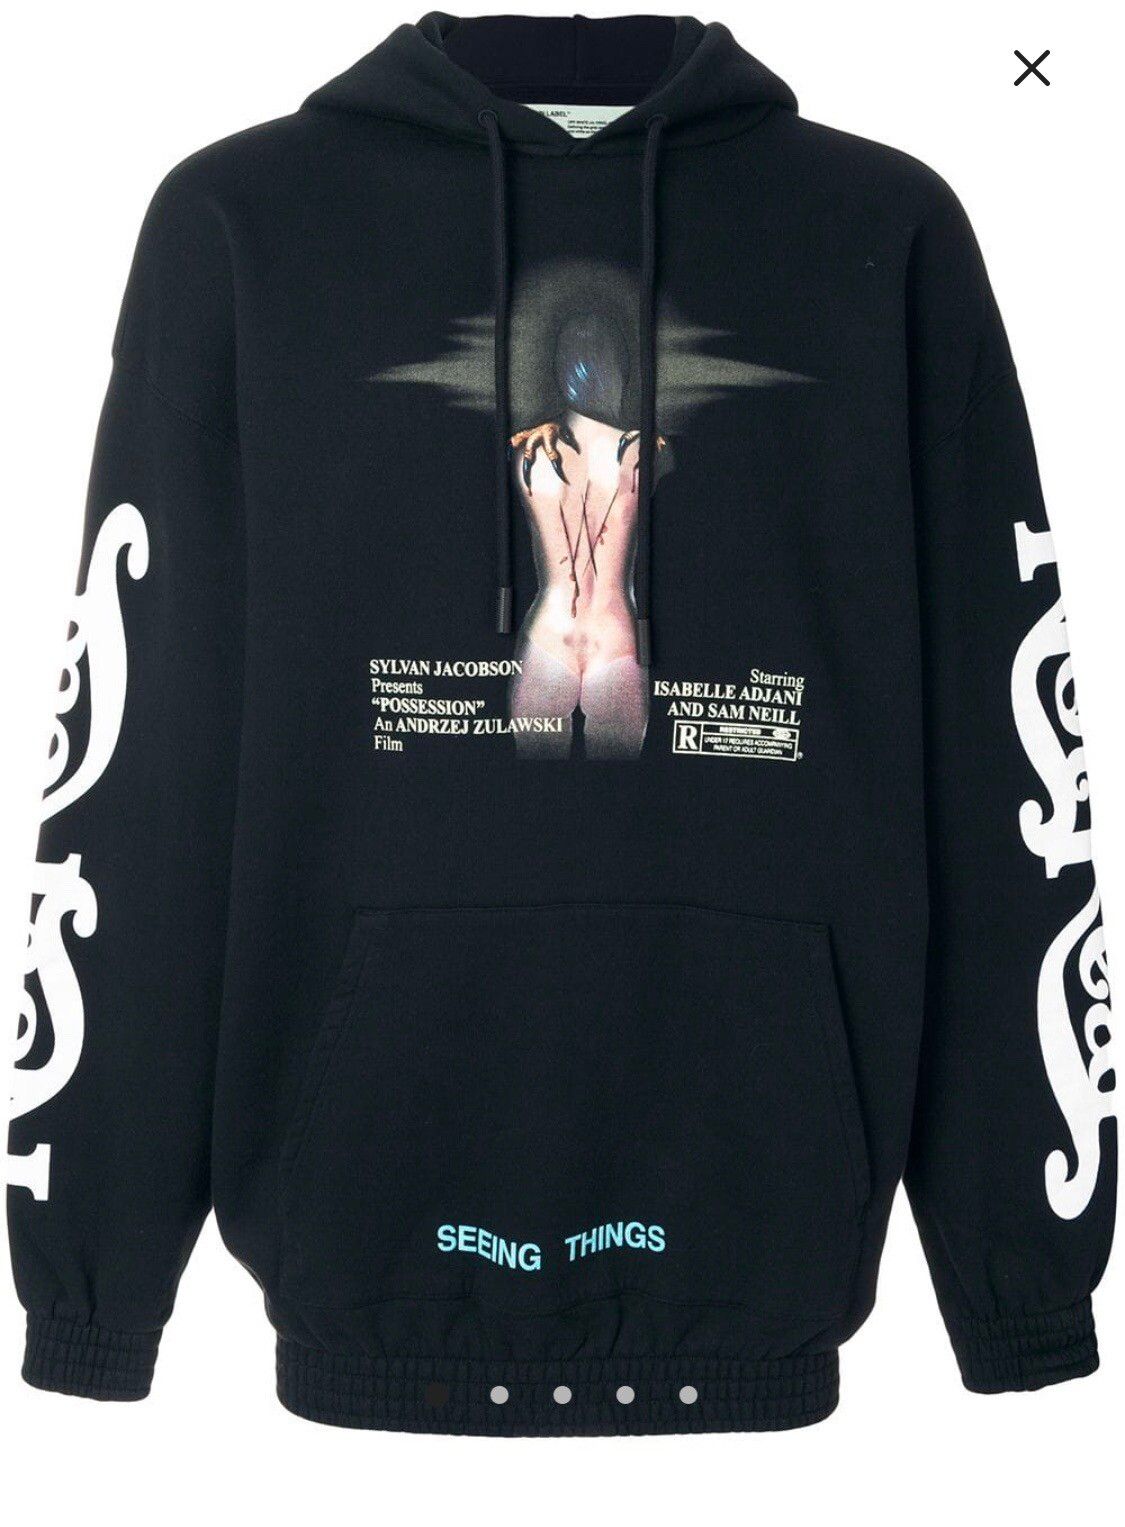 Off-White Off-White "Seeing Things" Hoodie Size US L / EU 52-54 / 3 - 1 Preview